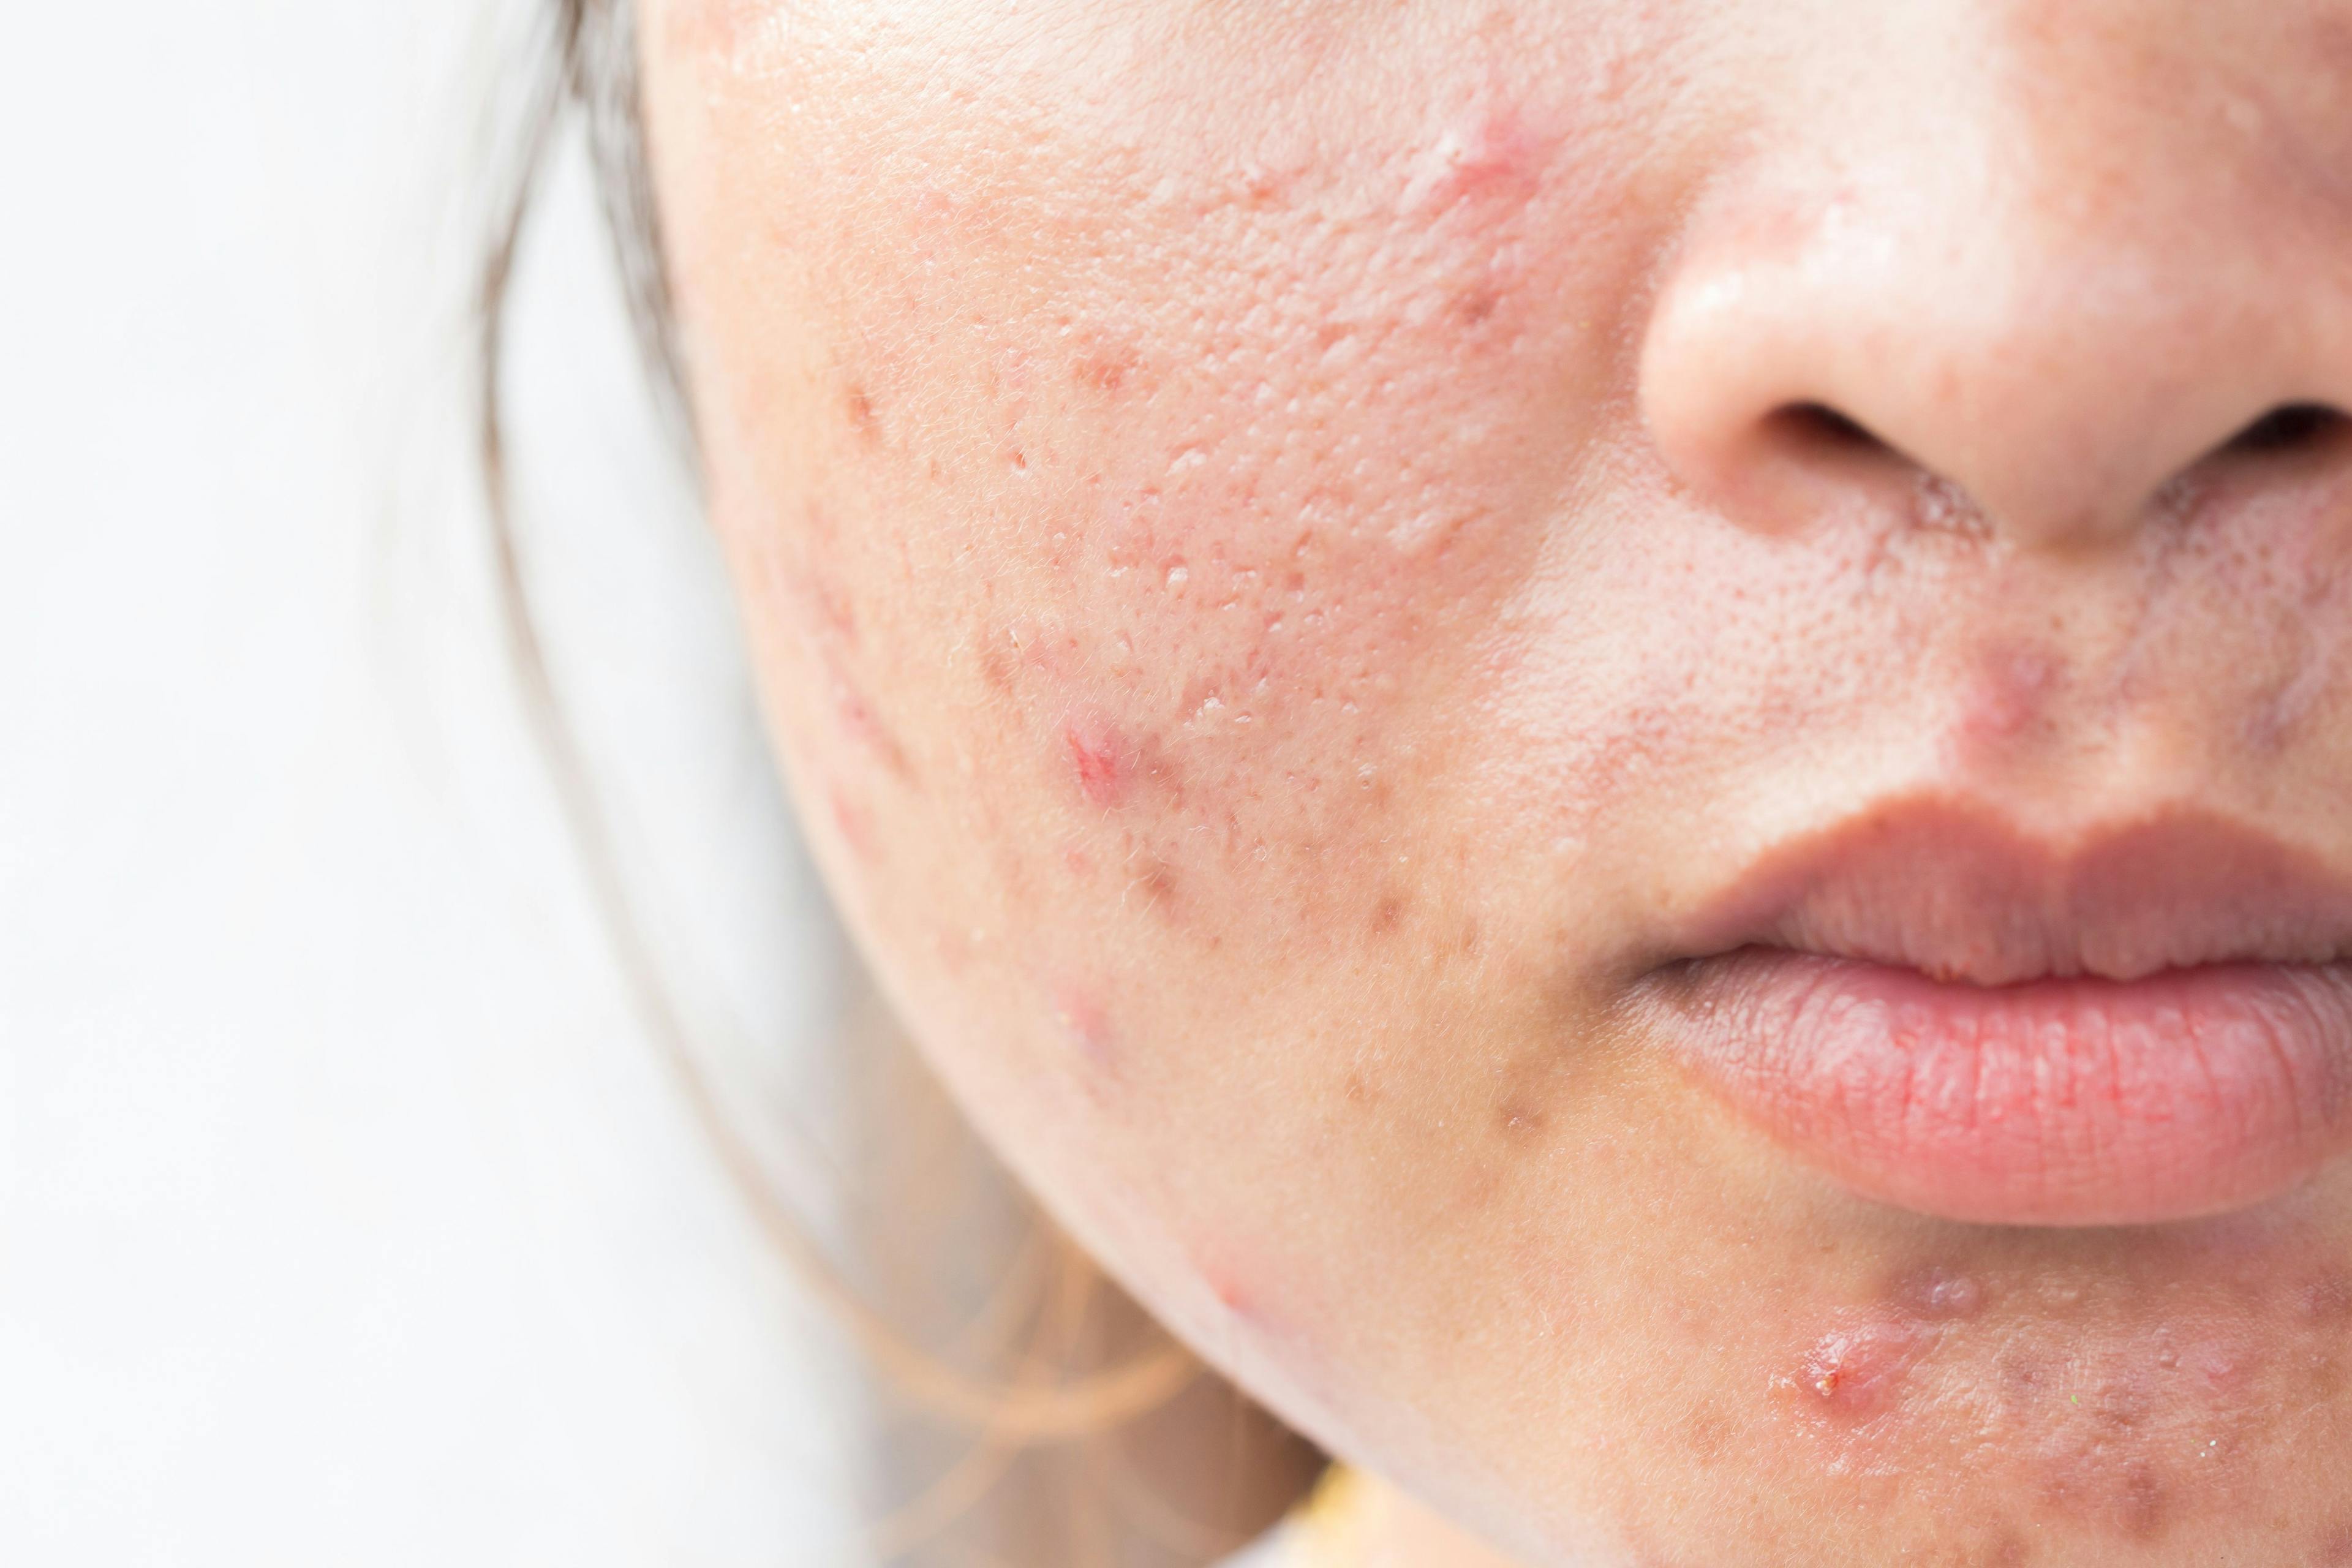 Anxiety Identified as Most Prevalent Comorbidity in Patients Using Isotretinoin For Acne